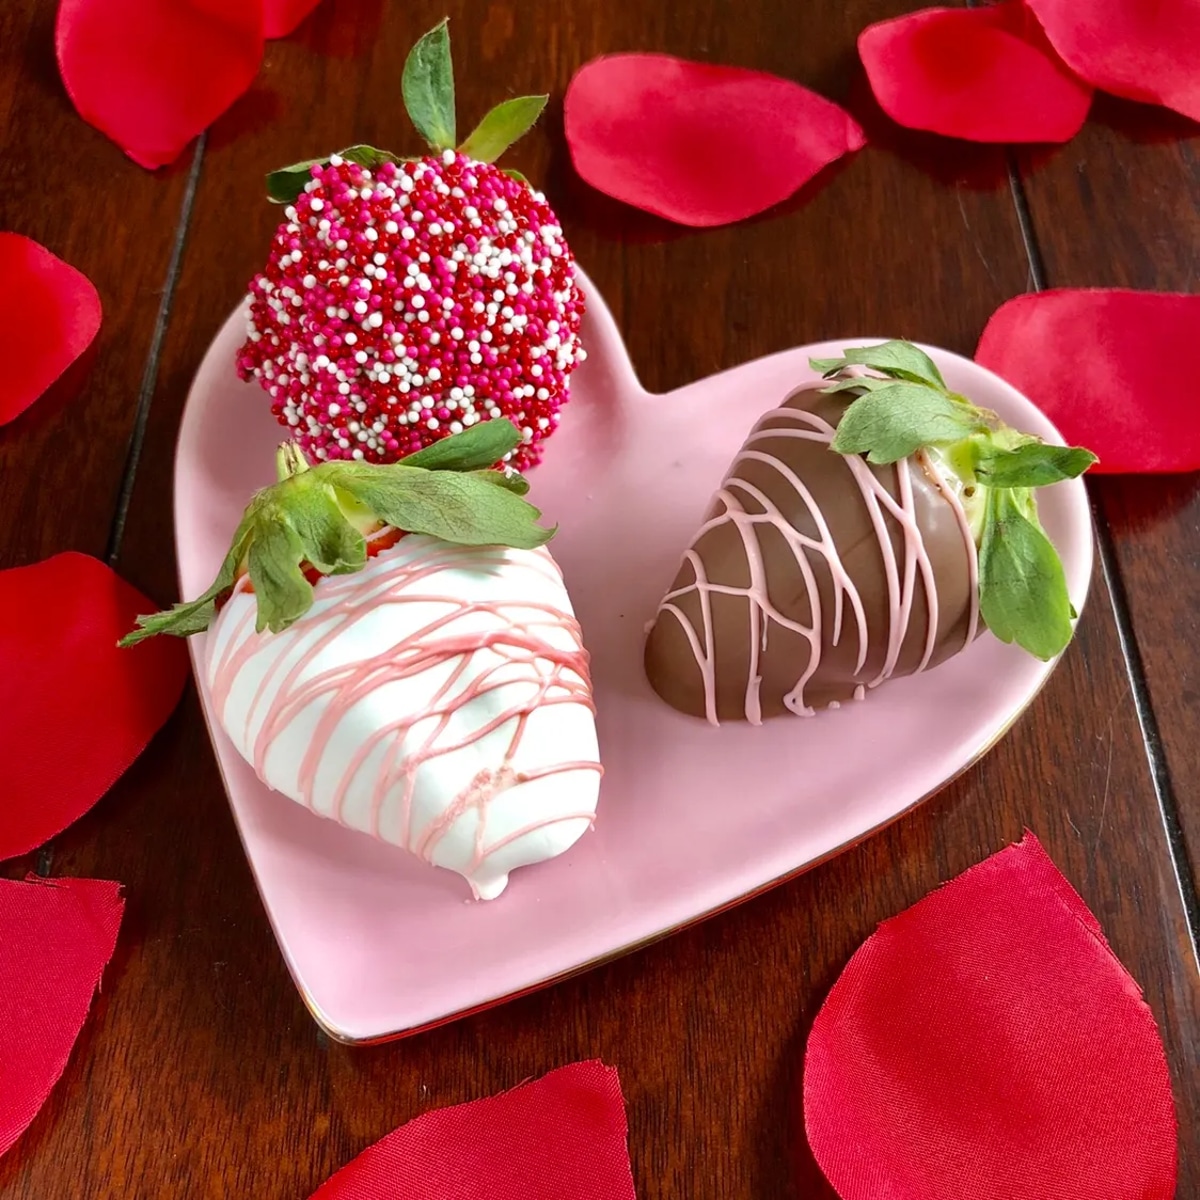 5 Irresistible Valentine's Dessert Recipes to Wow Your Lover